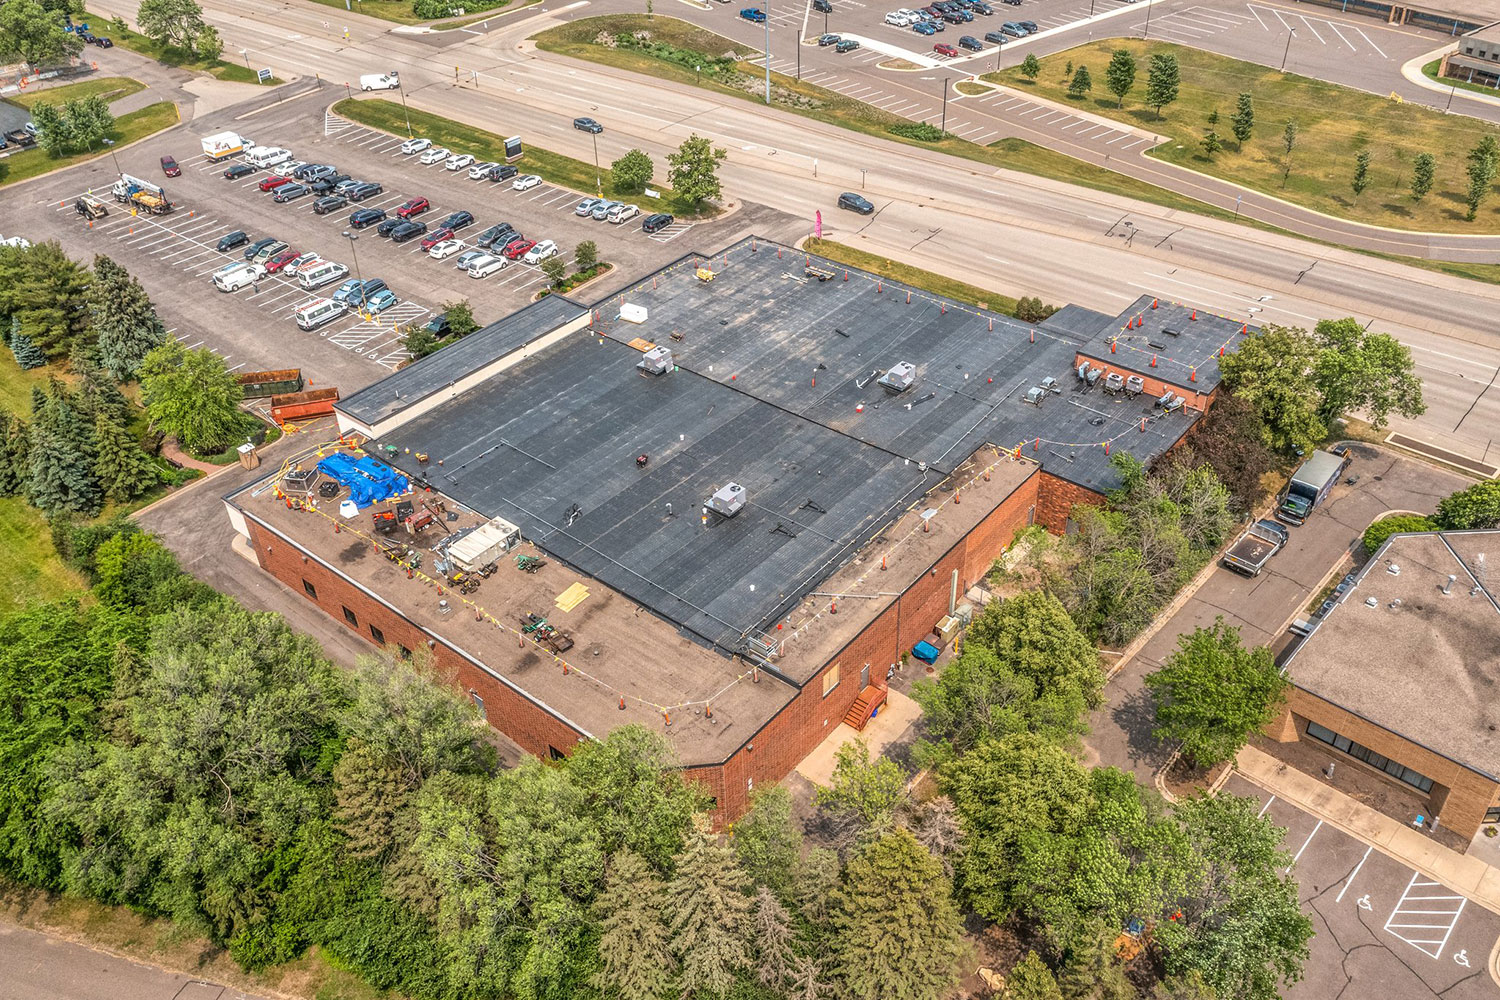 Commercial Roof Maintenance: Plan Ahead to Avoid Costly Repairs